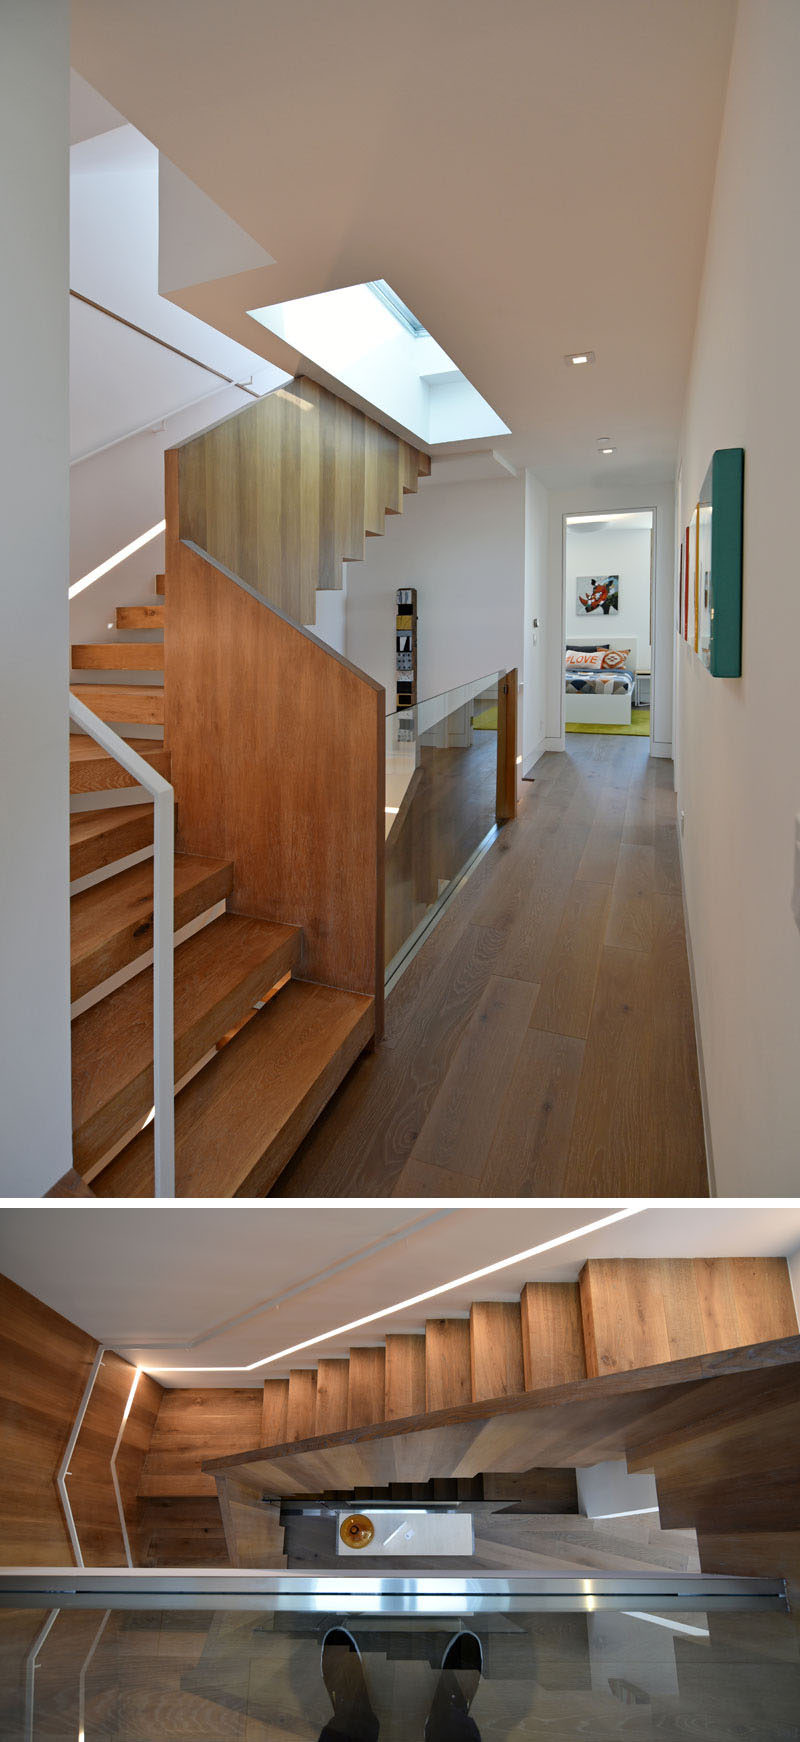 These modern wood stairs with a skylight have a small light built into the wall that runs the length of the stairs to provide light when it's dark outside.